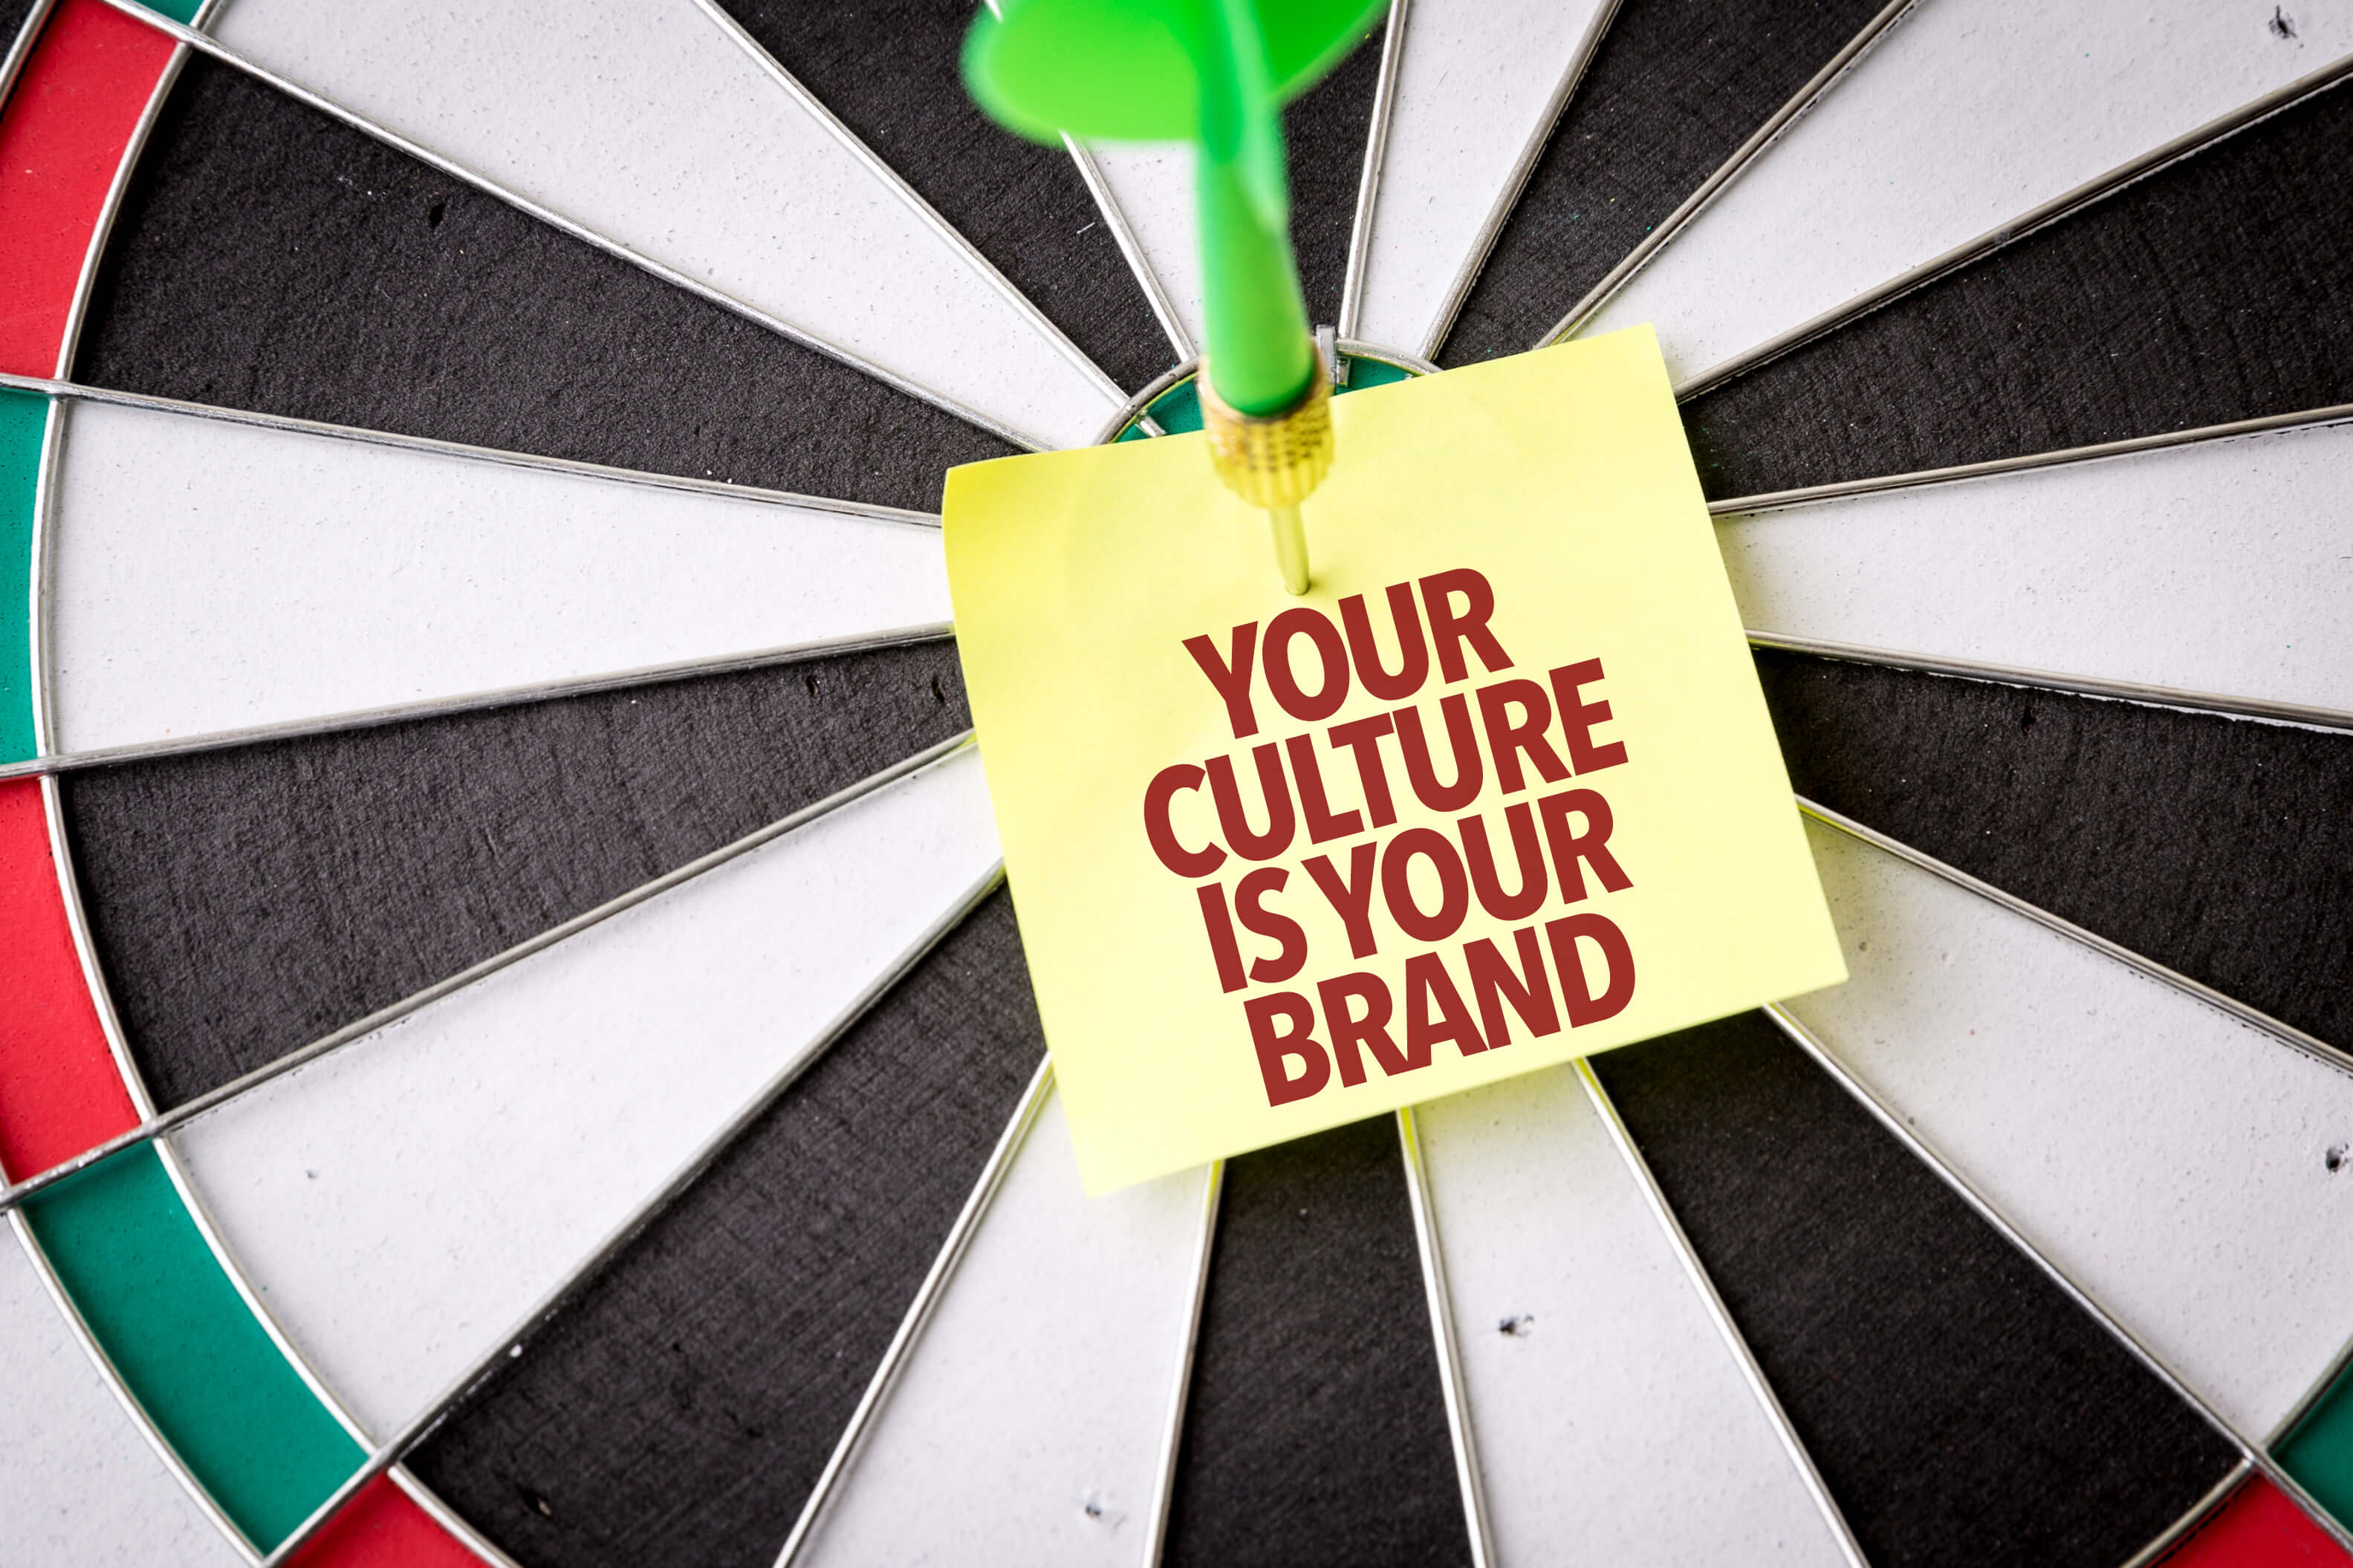 Your culture is your brand on dart board